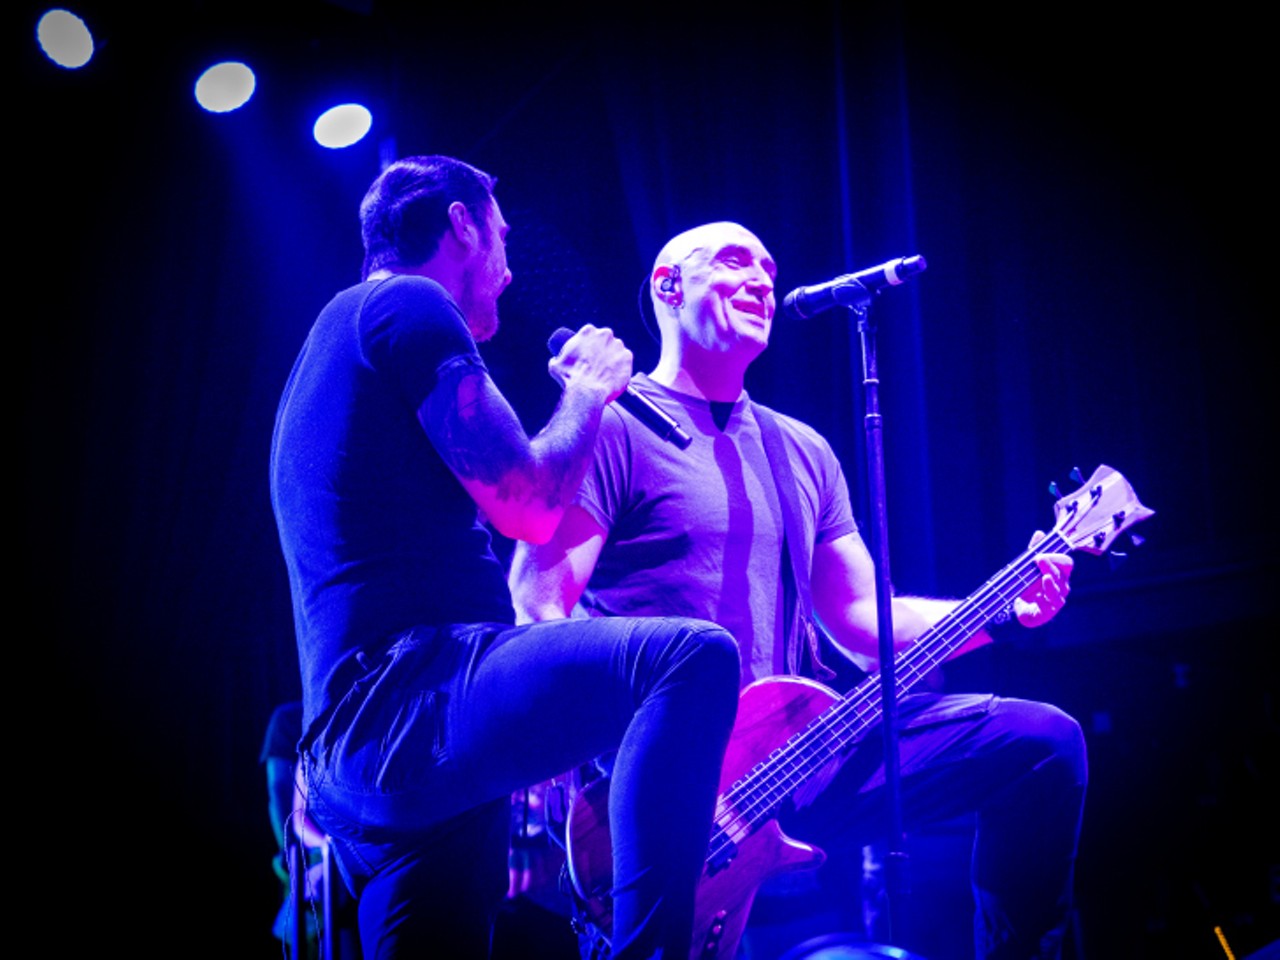 Everything we saw at the Breaking Benjamin show at DTE Energy Music Theatre